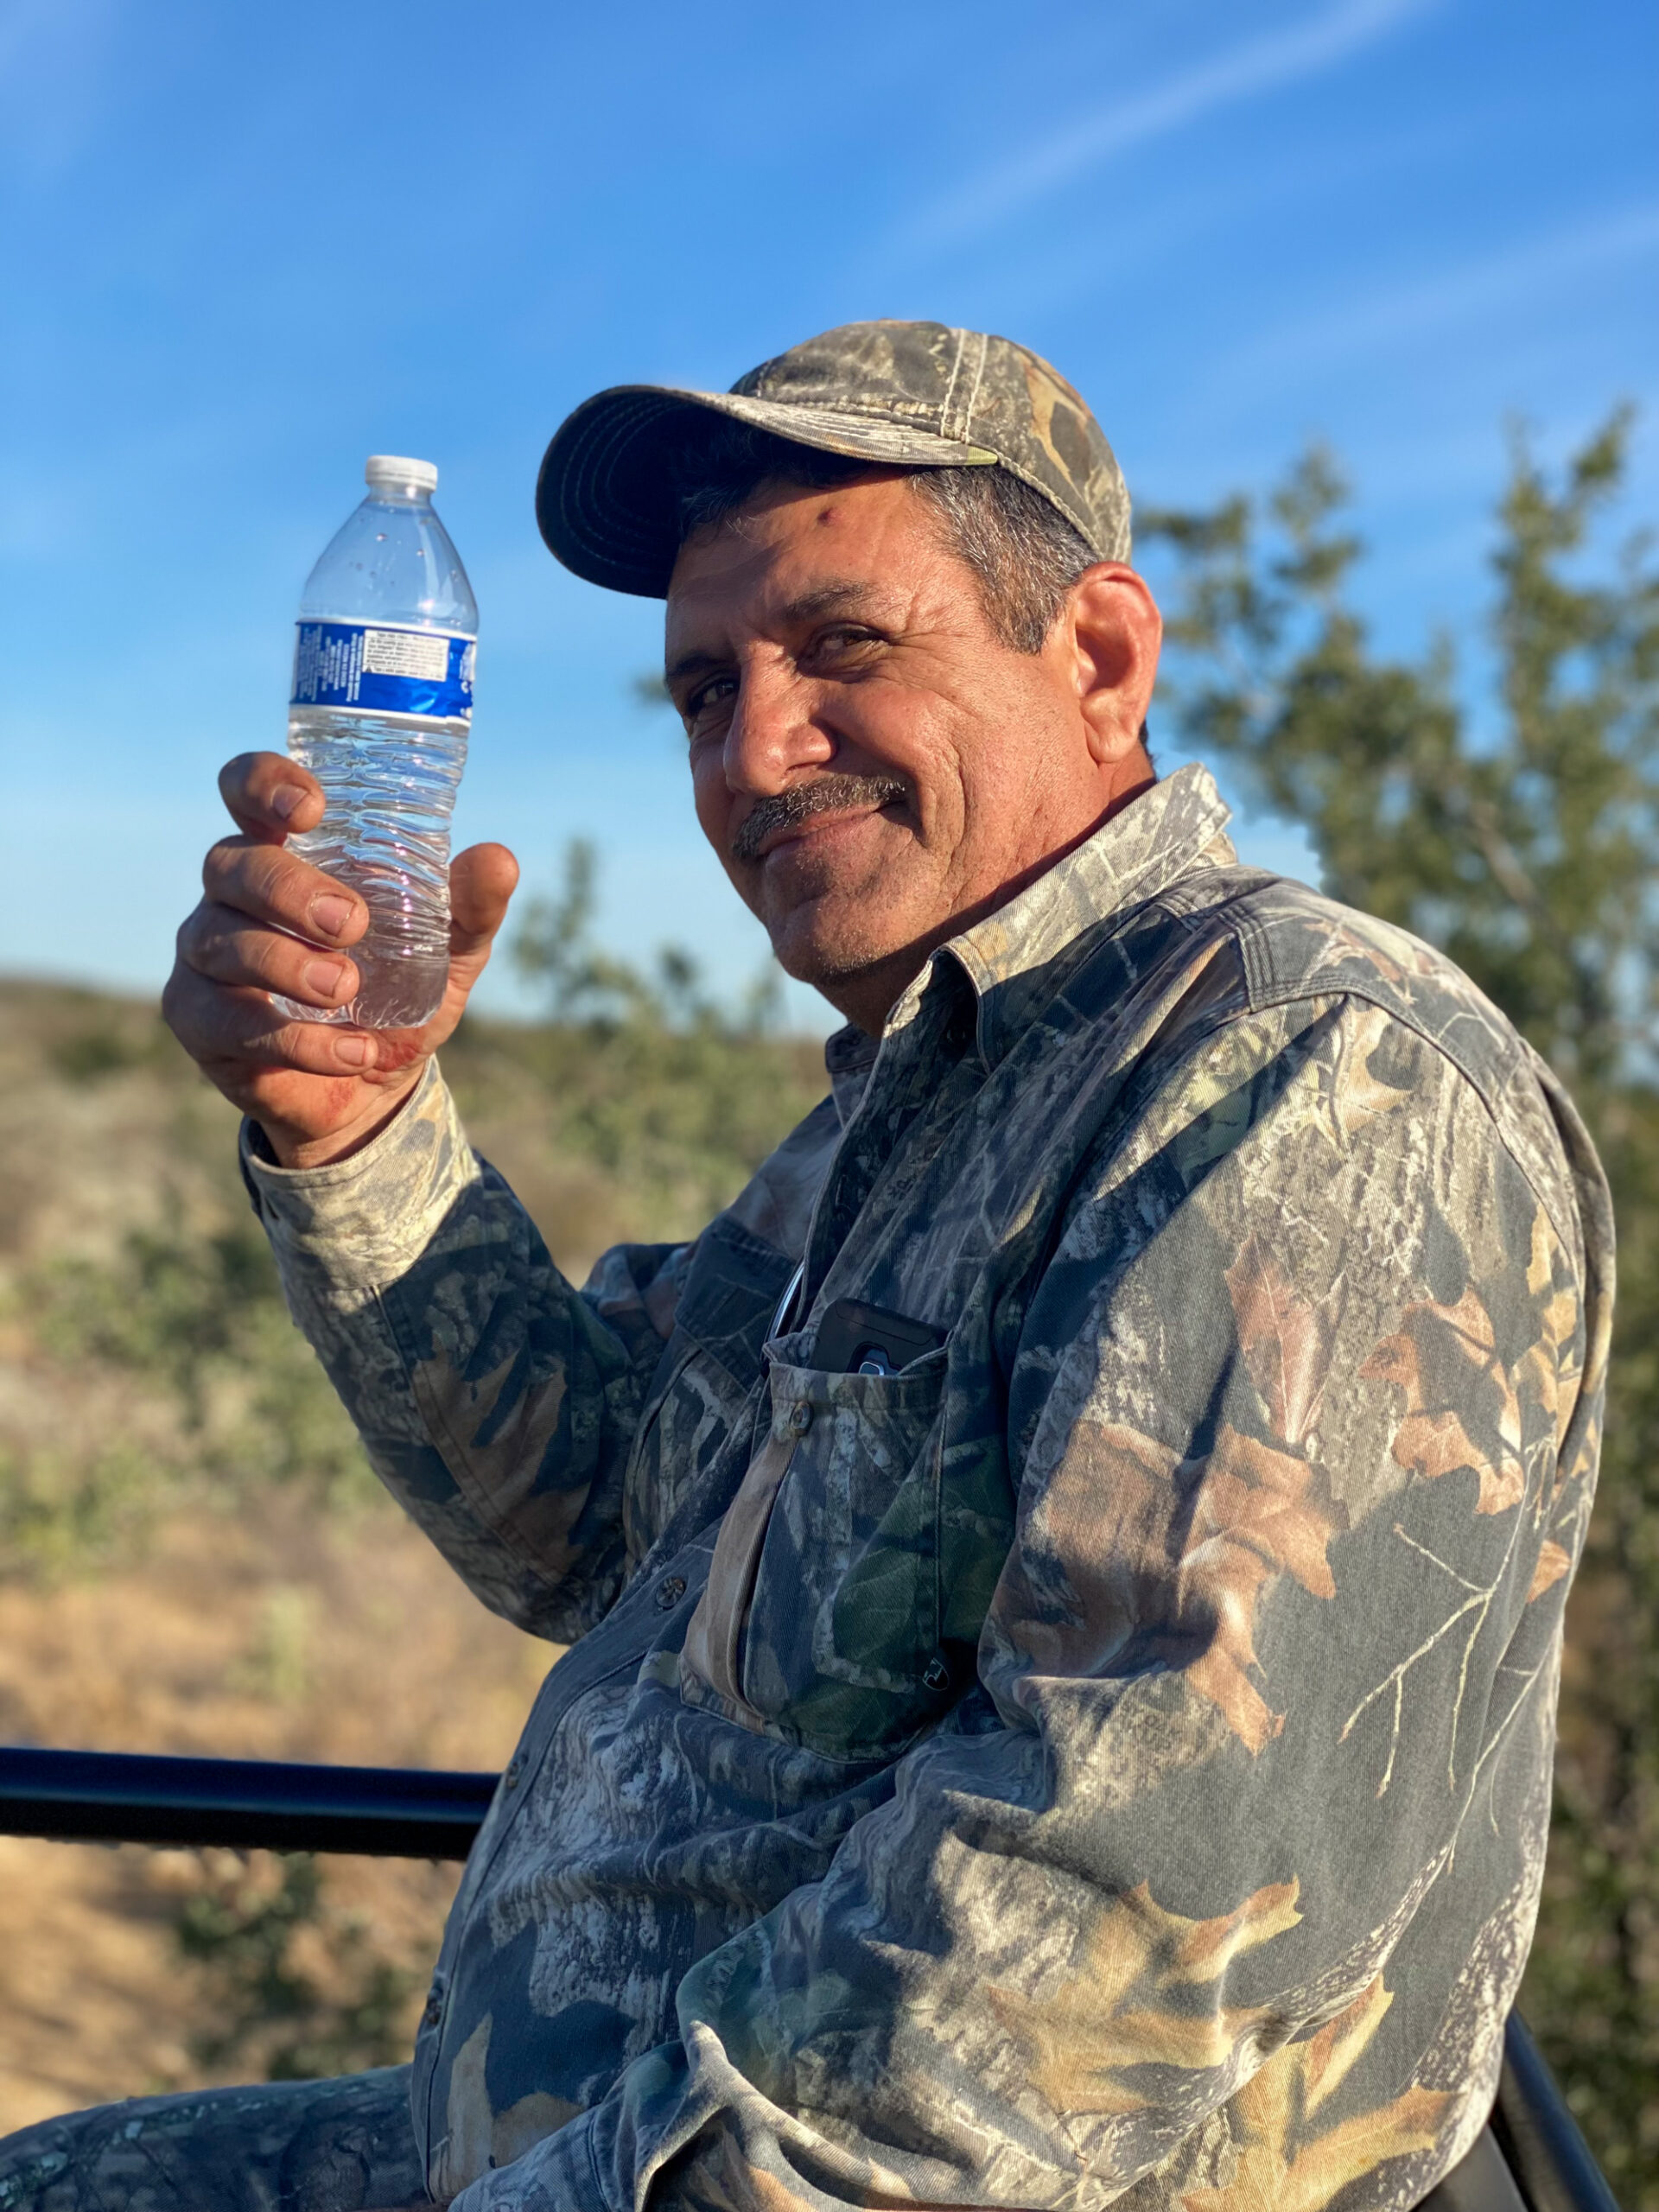 hunting guide holds water bottle